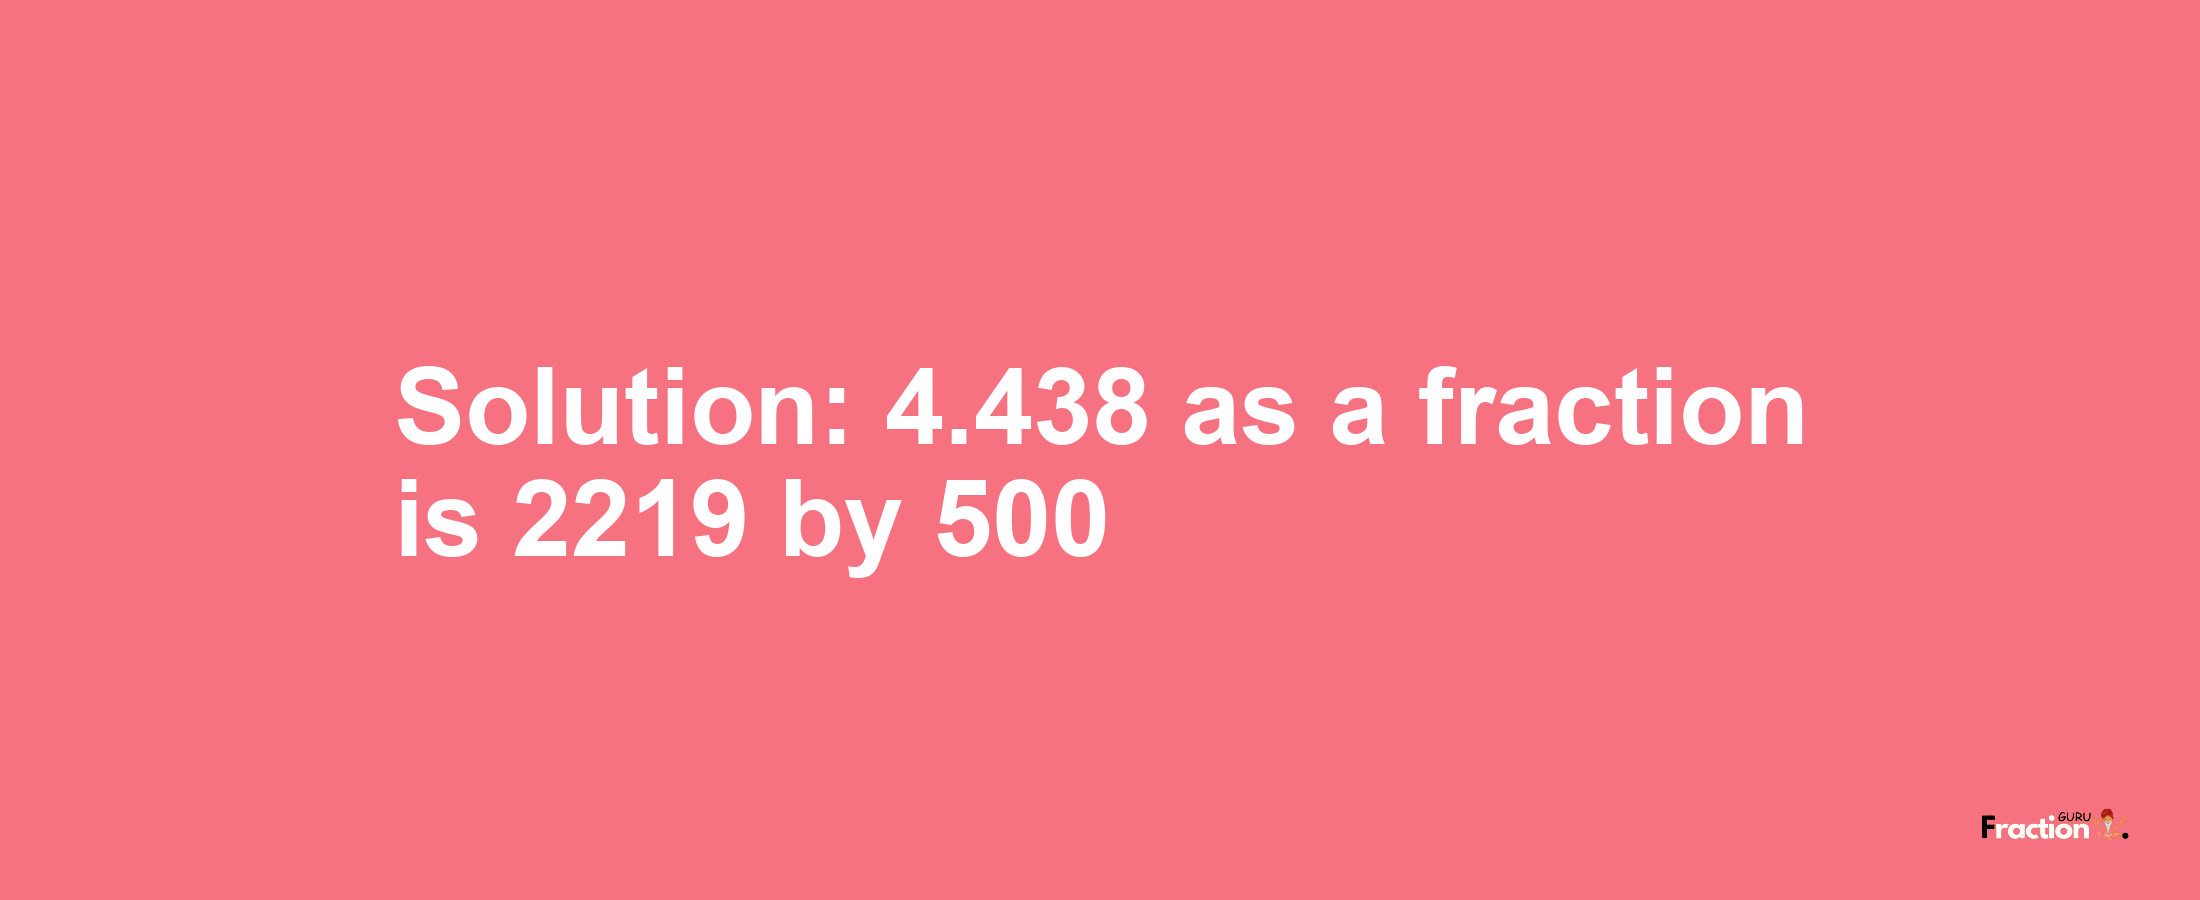 Solution:4.438 as a fraction is 2219/500